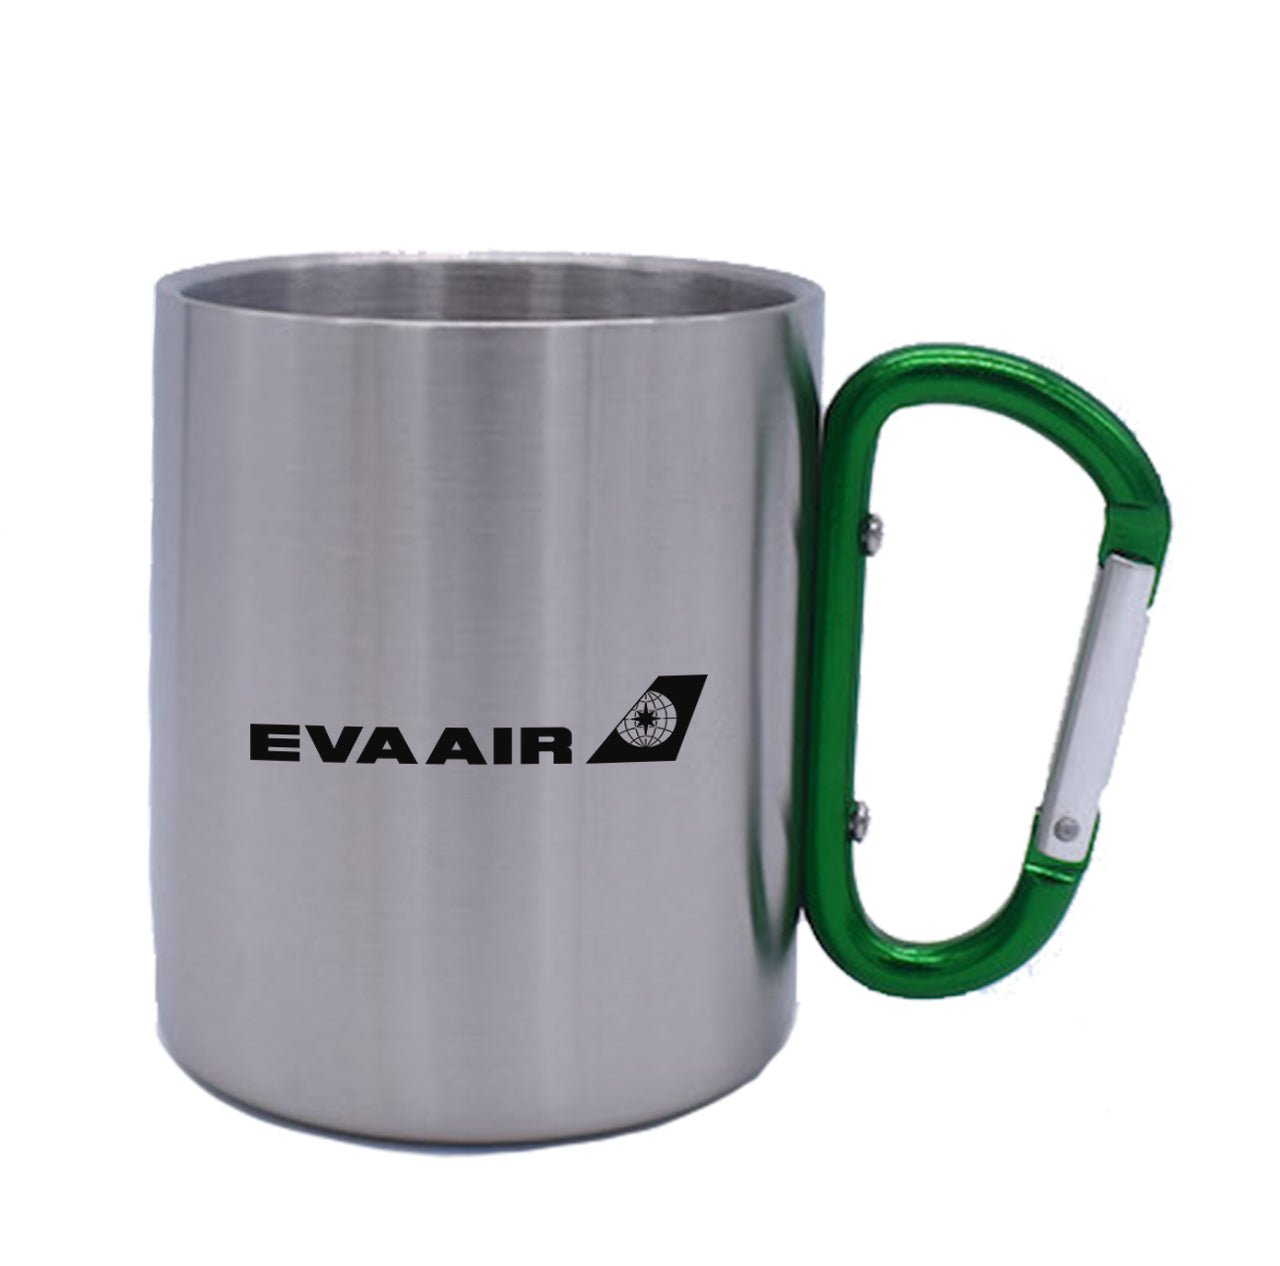 EVA Air Airlines(2) Designed Stainless Steel Outdoors Mugs